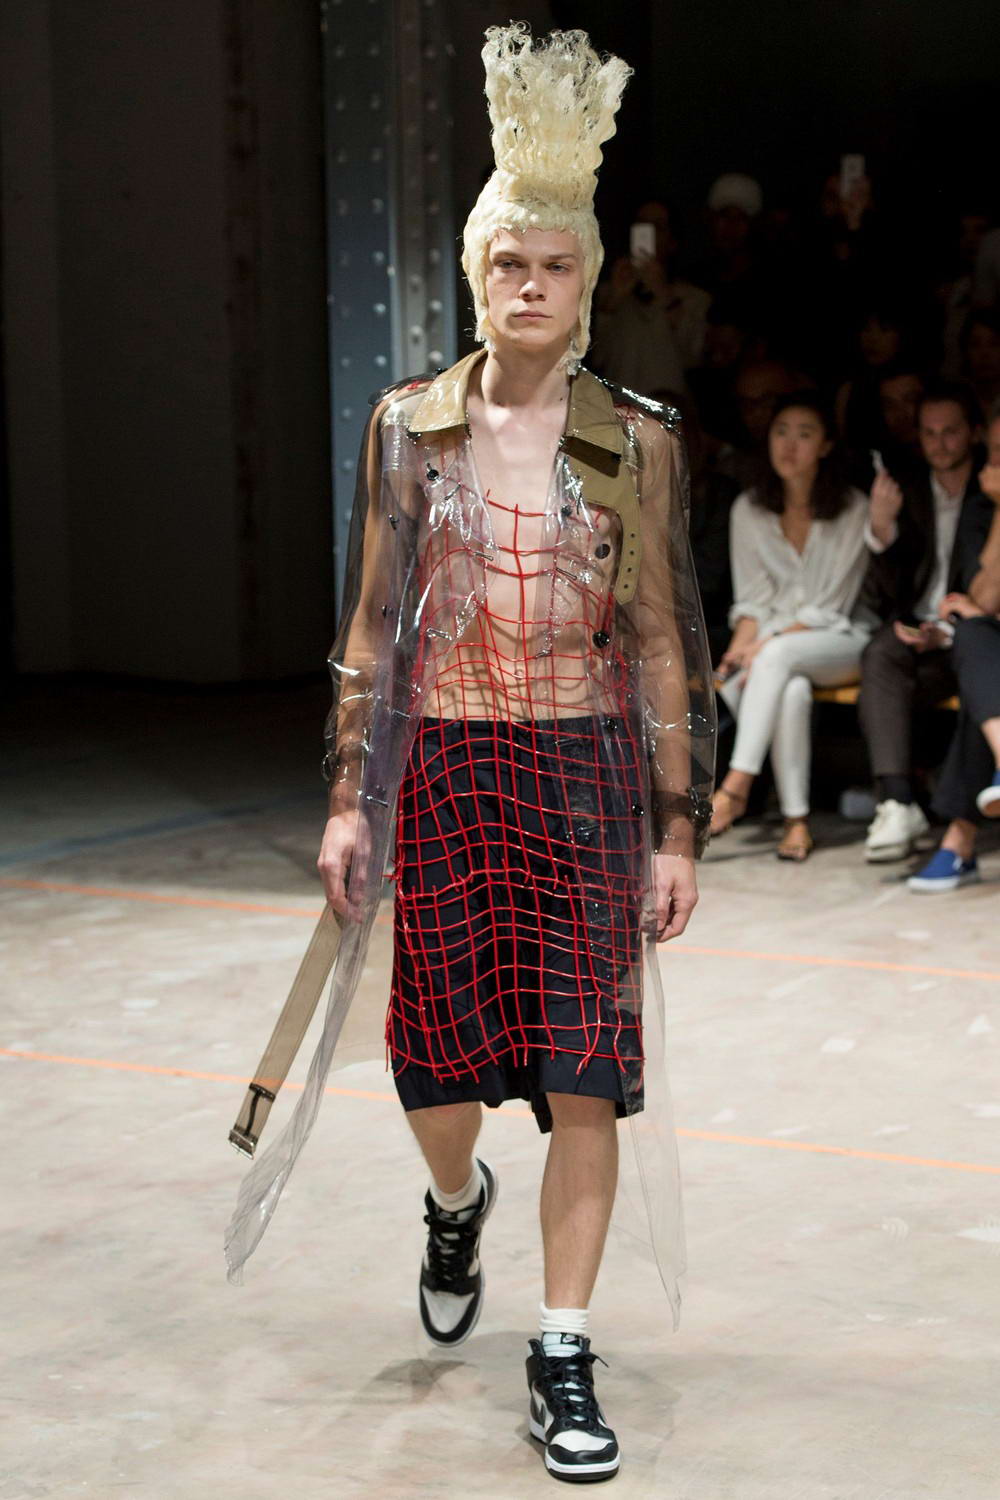 Men's Summer Fashion 2020 Featuring Skirts and Dresses for the Fellas